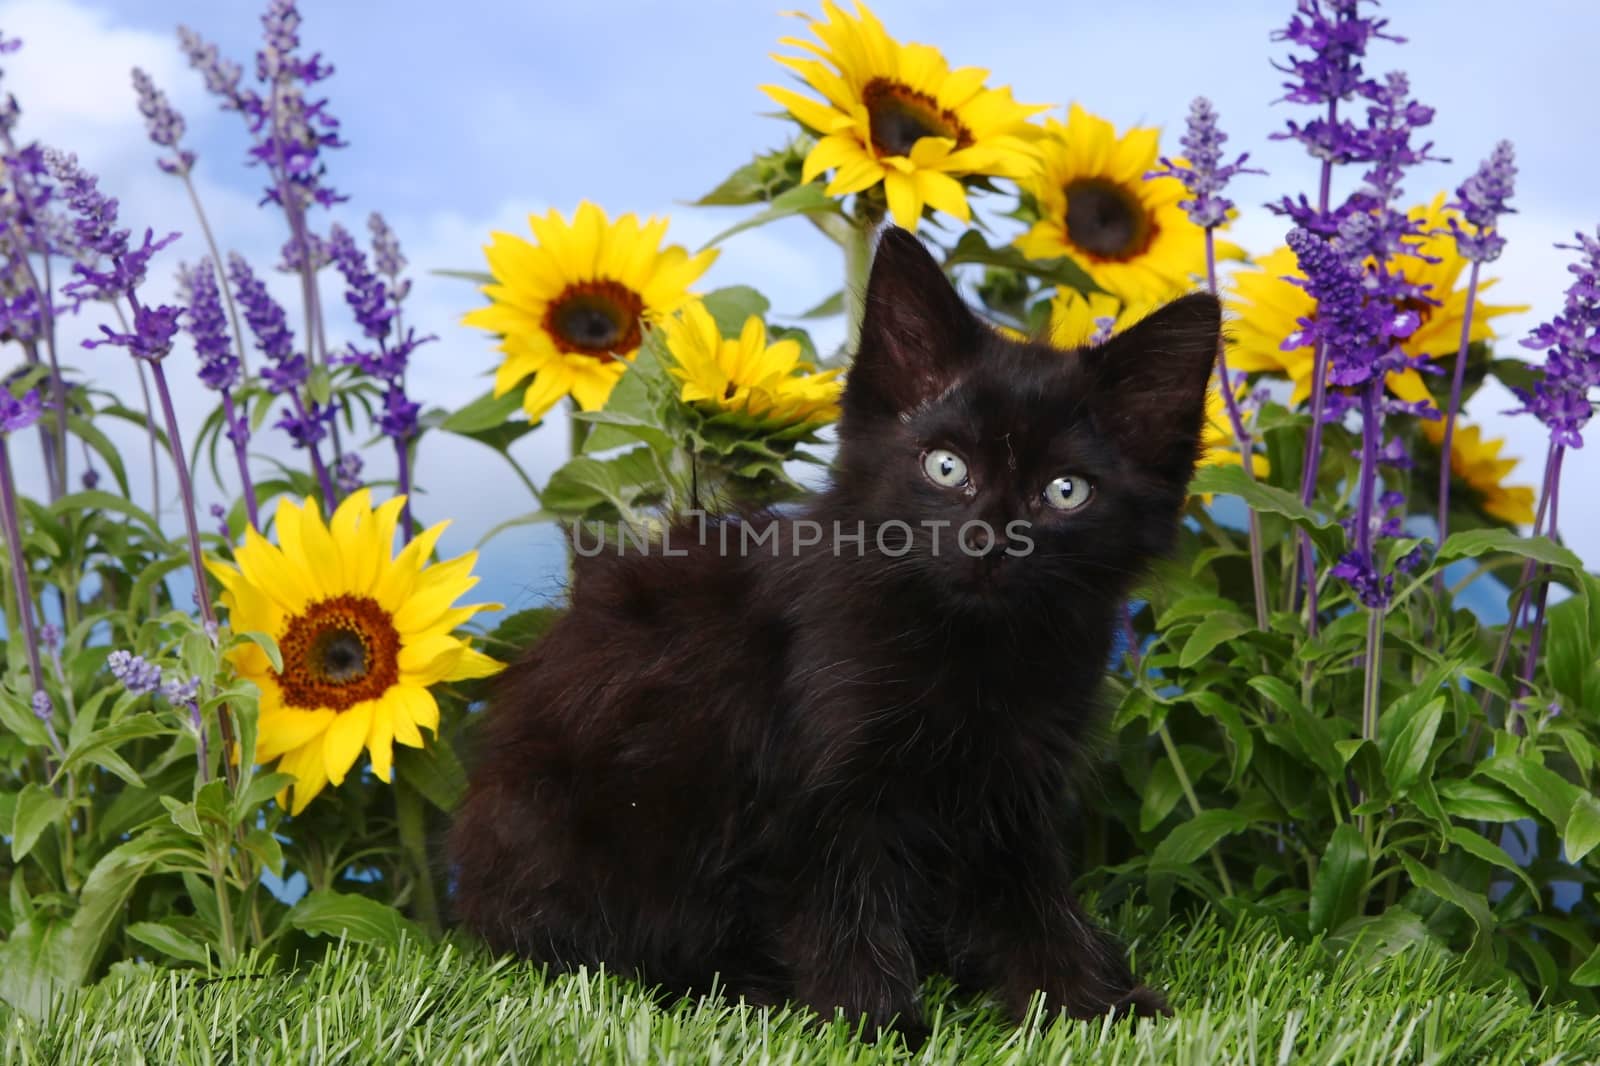 Cute Black Kitten in the Garden With Sunflowers and Salvia by tobkatrina